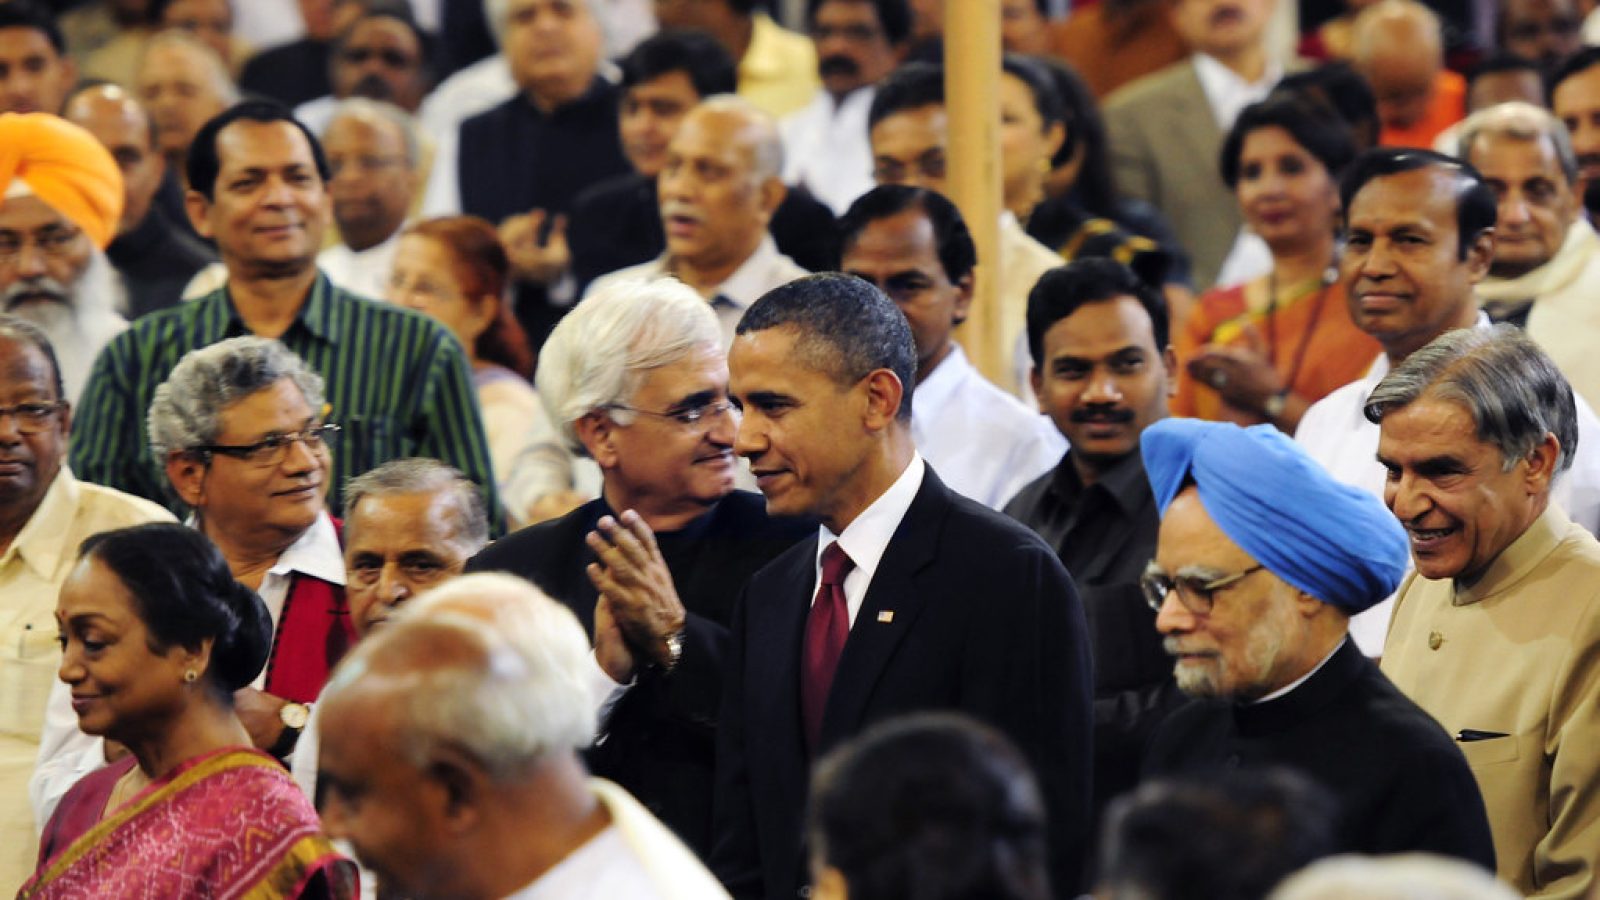 President Obama visits the Indian Parliament